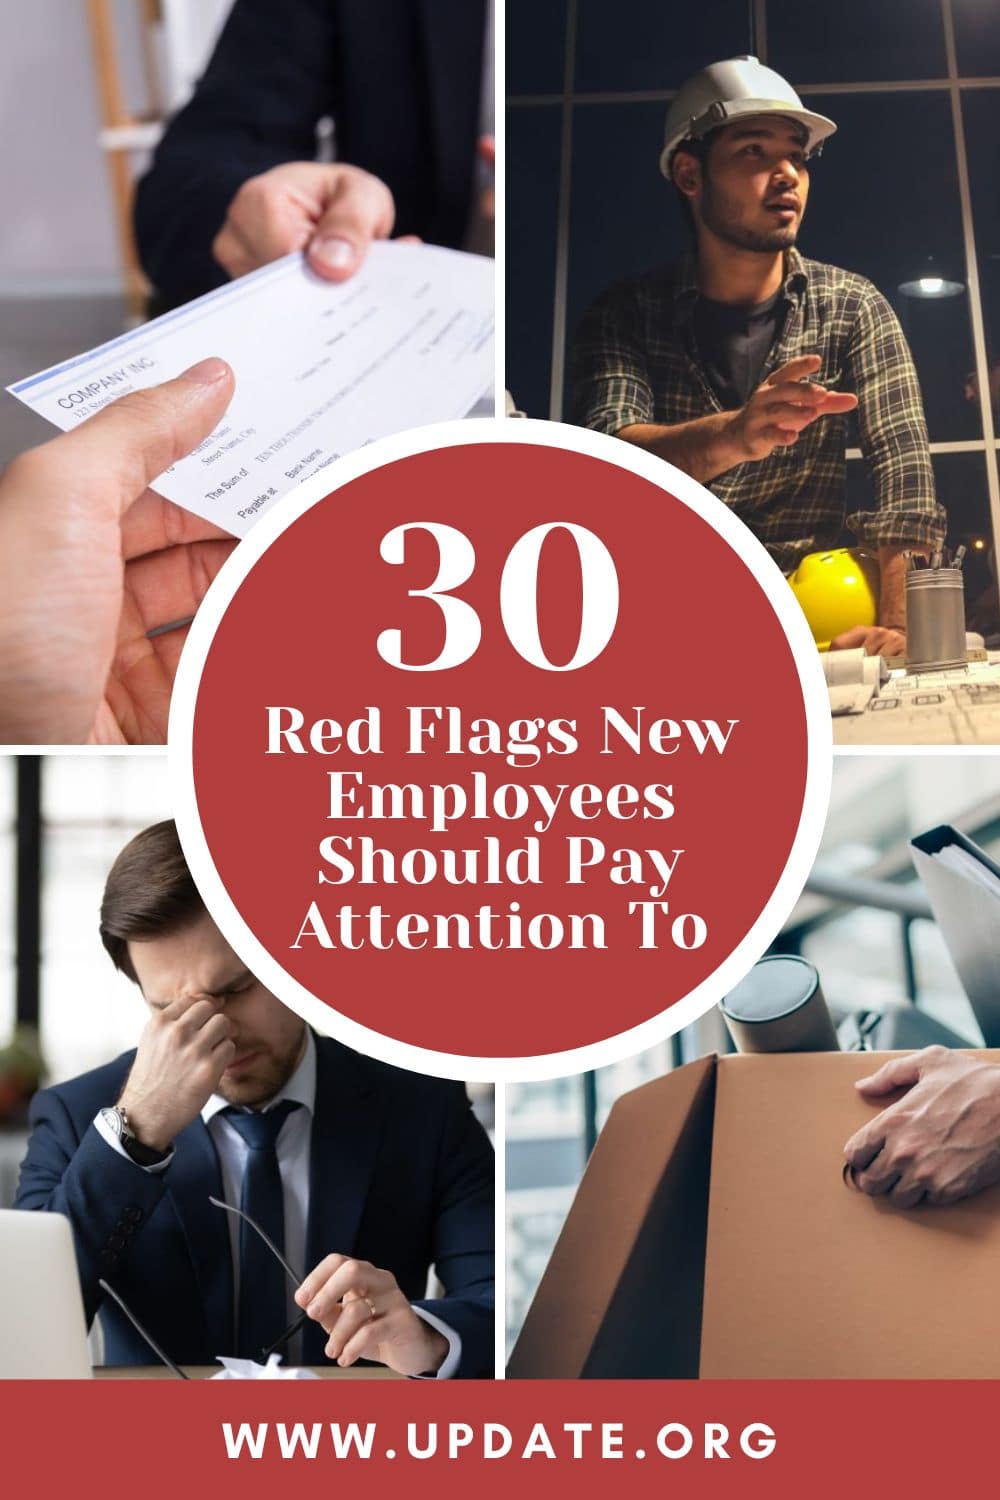 30 Red Flags New Employees Should Pay Attention To pinterest image.